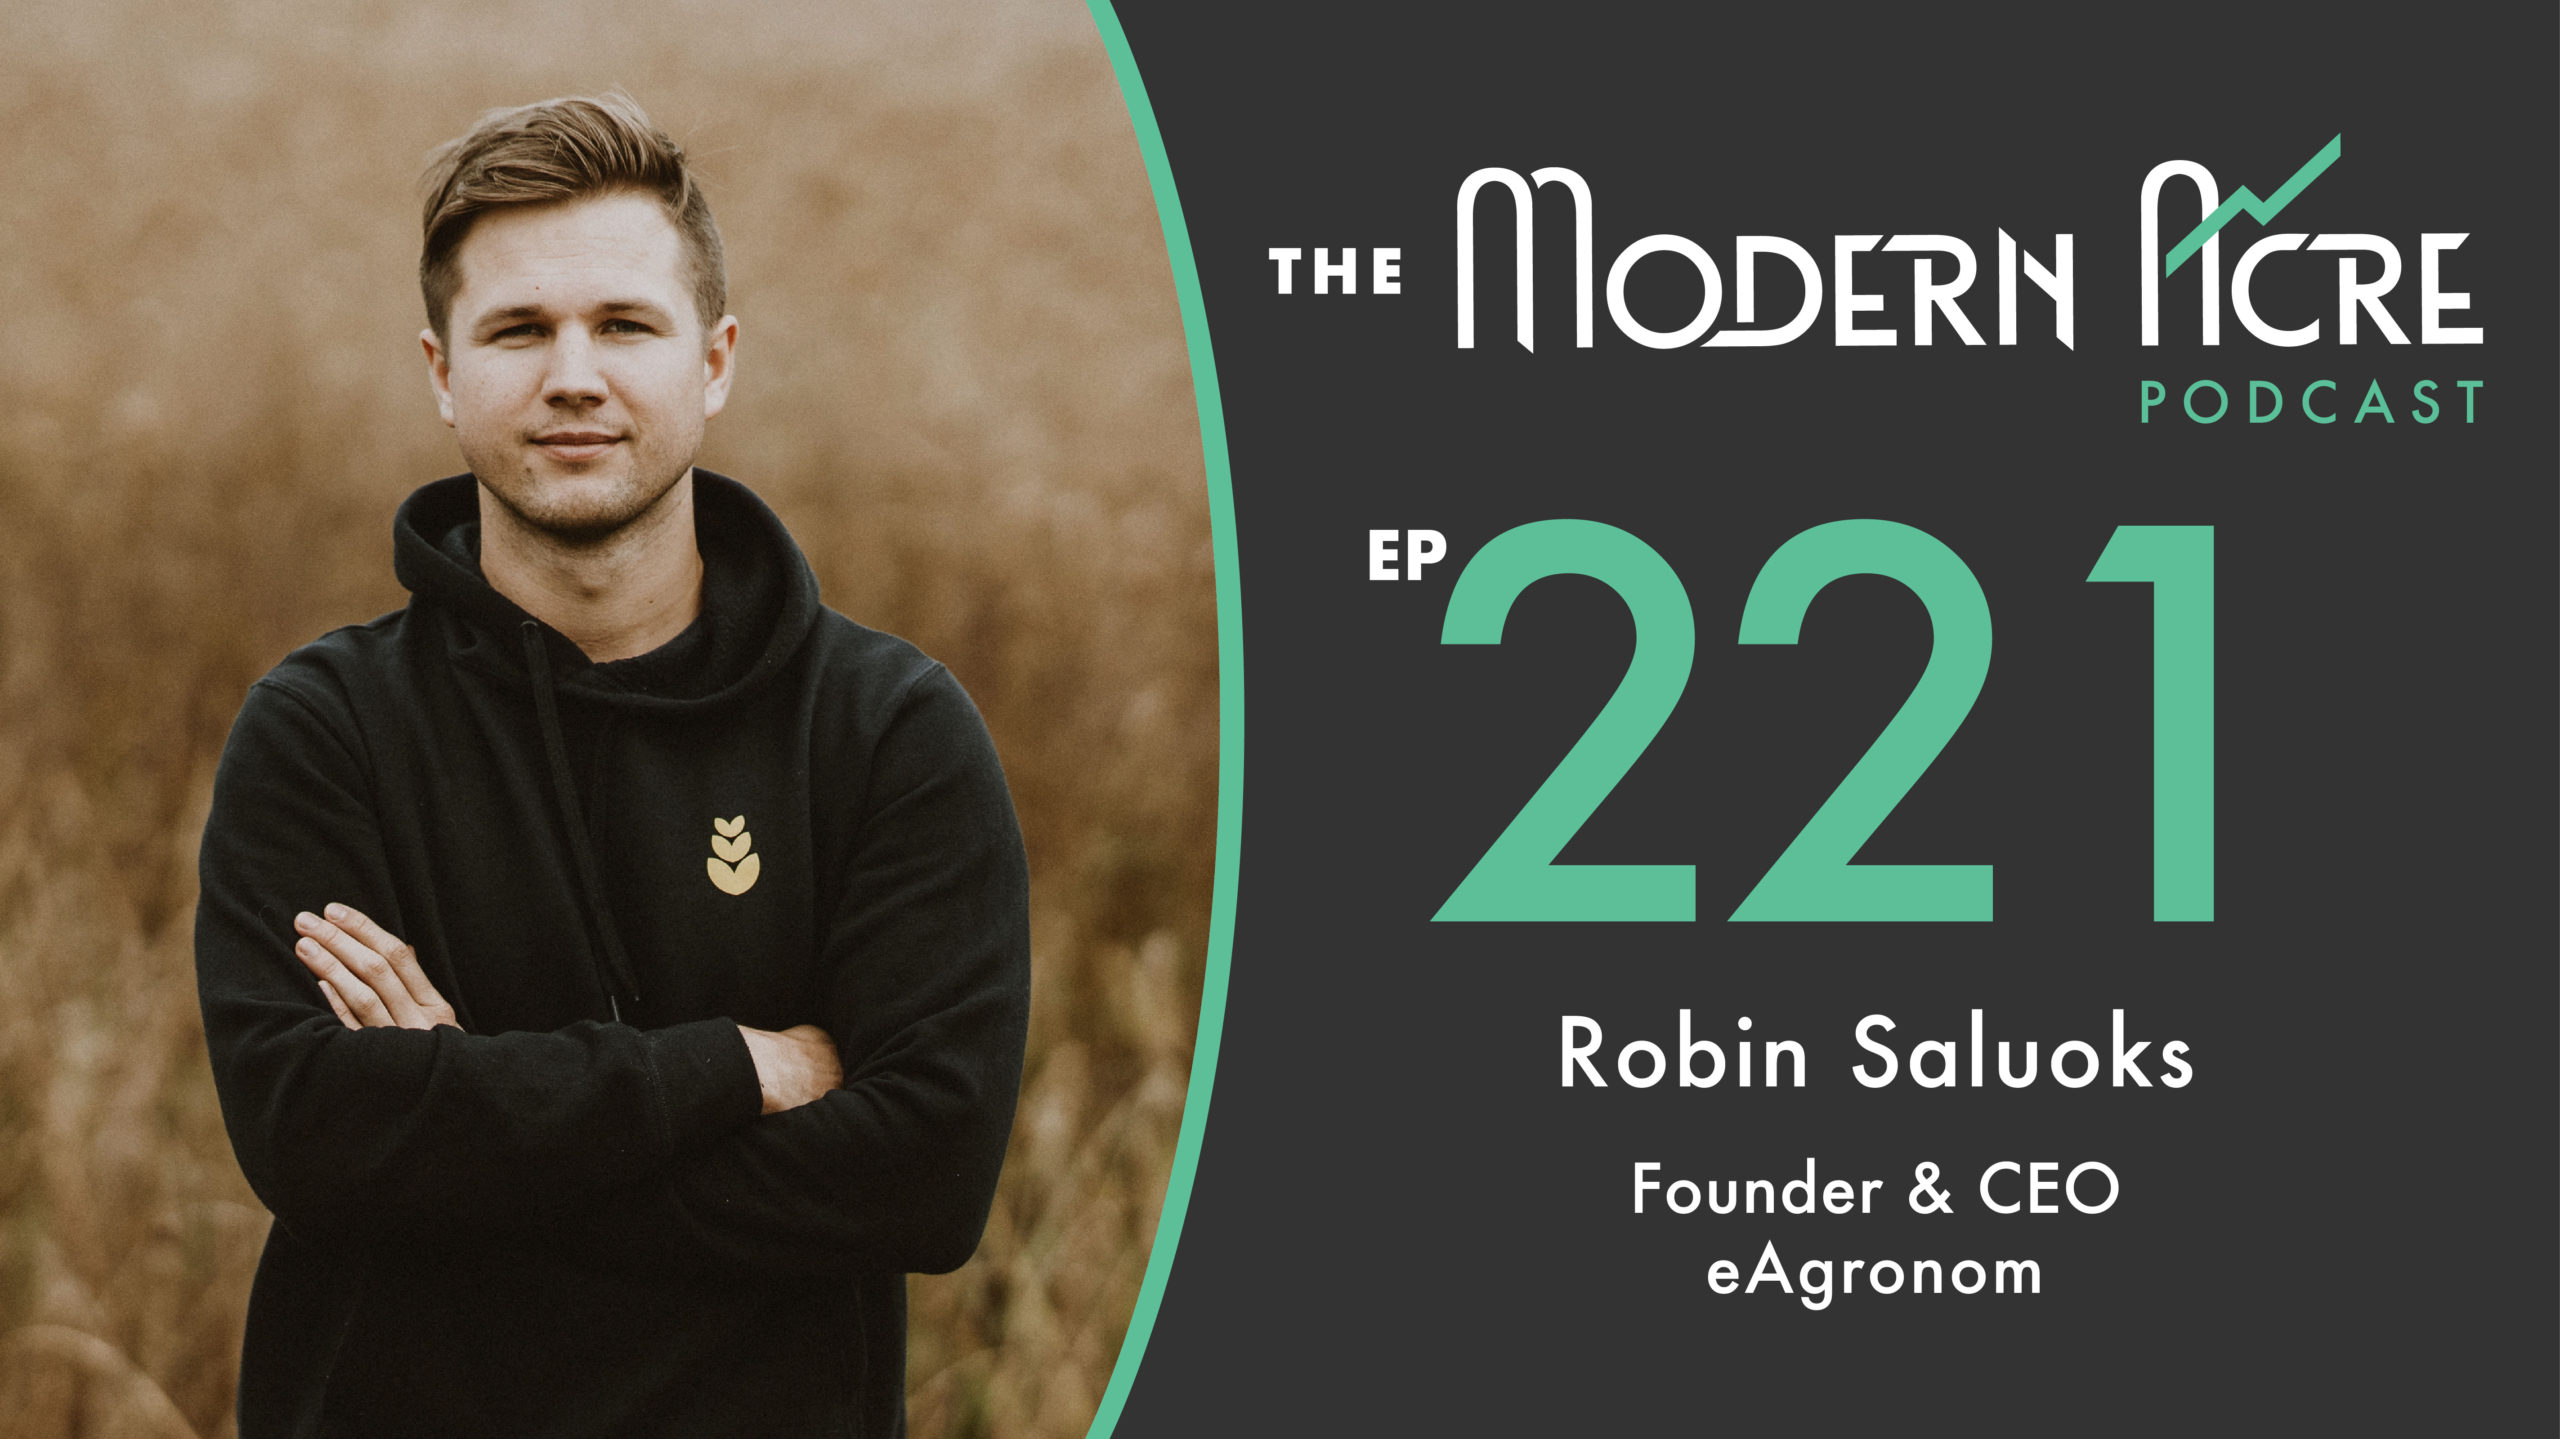 modern acre podcast eagronom ceo